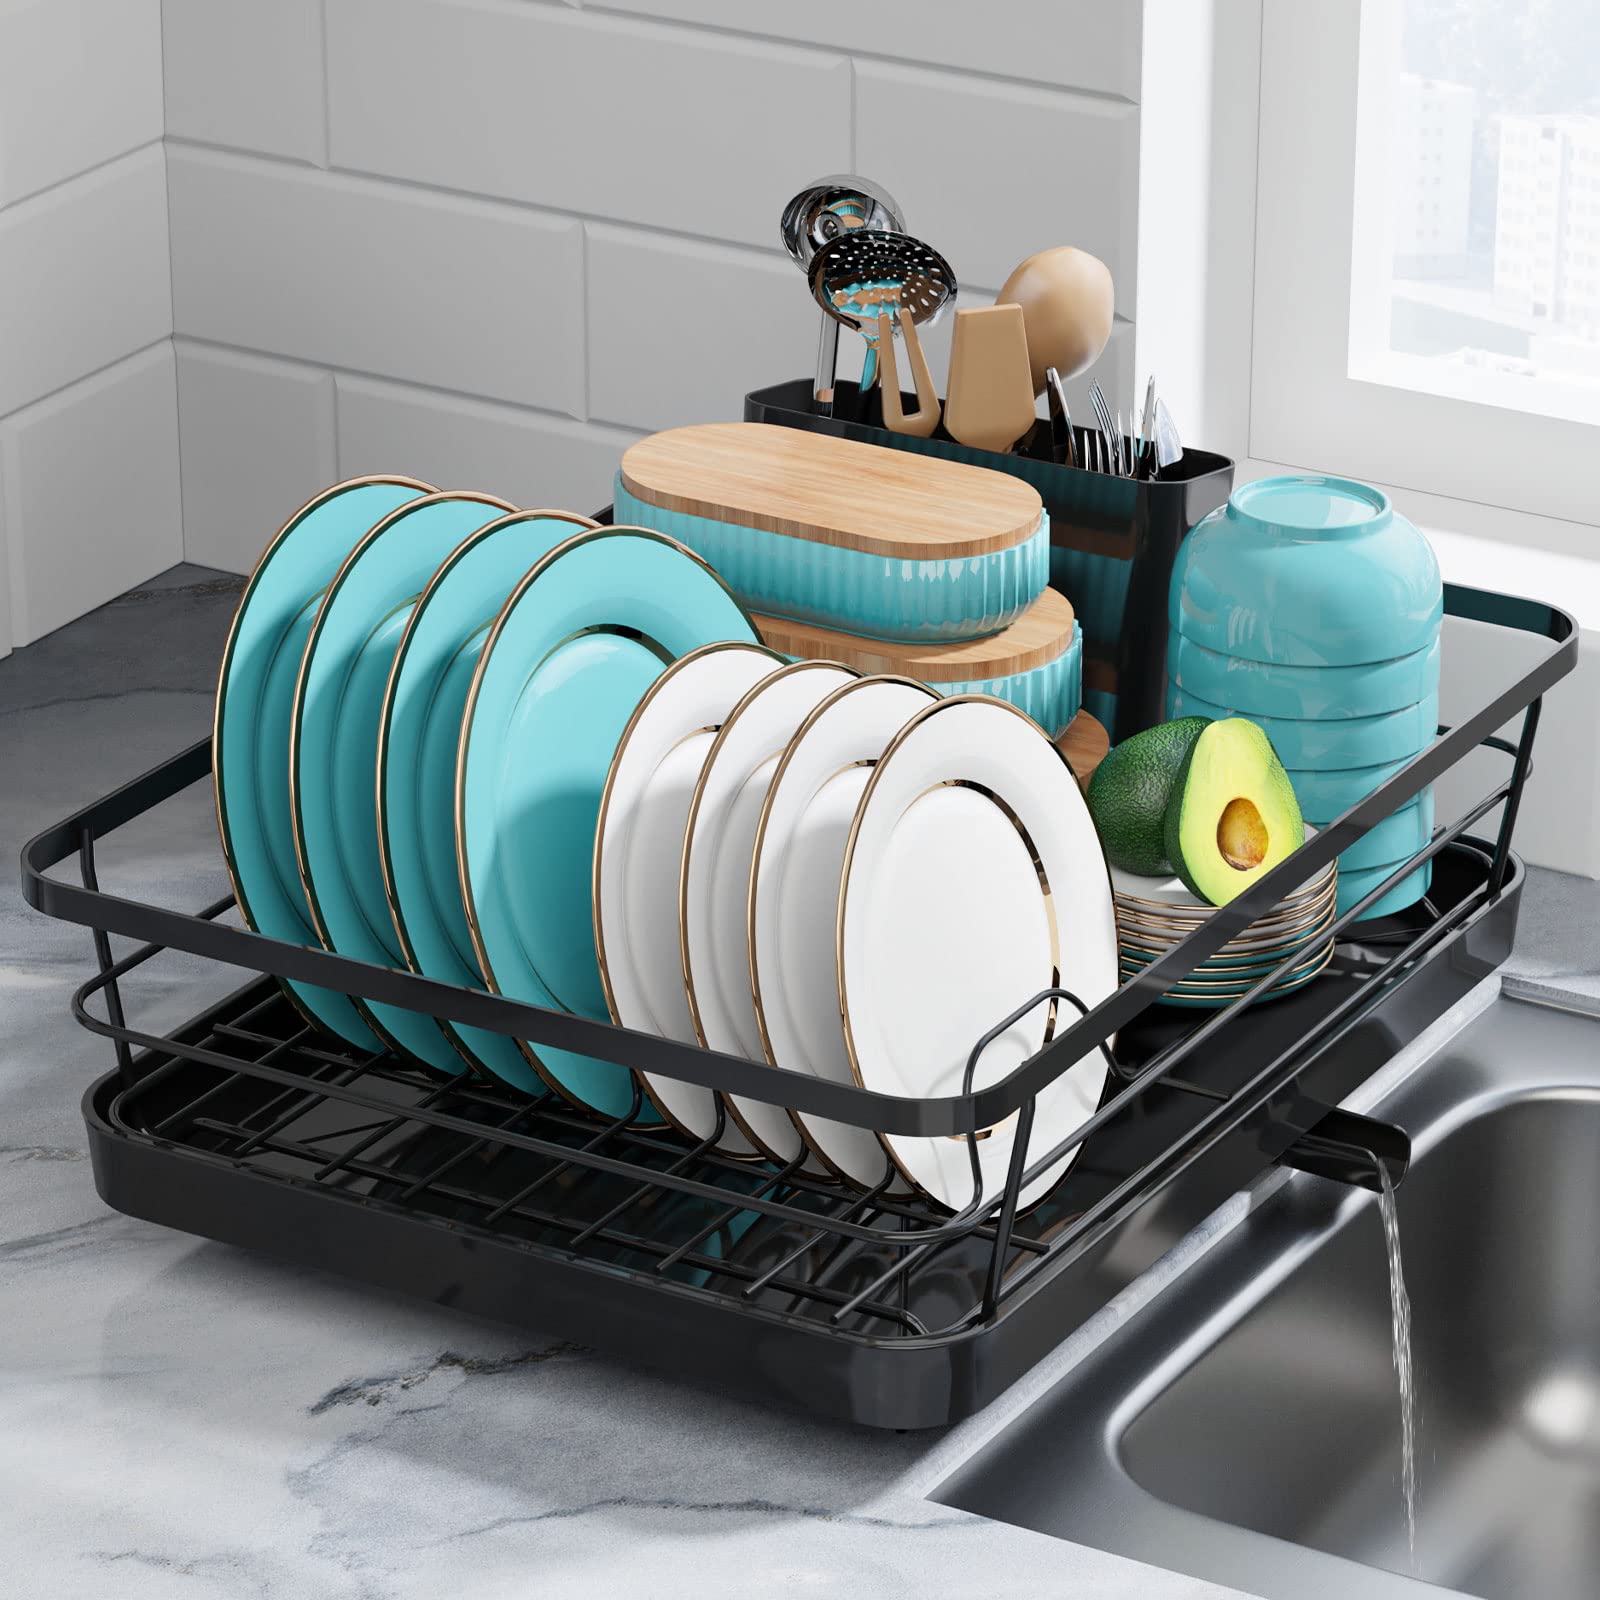 Where To Put A Dish Drying Rack